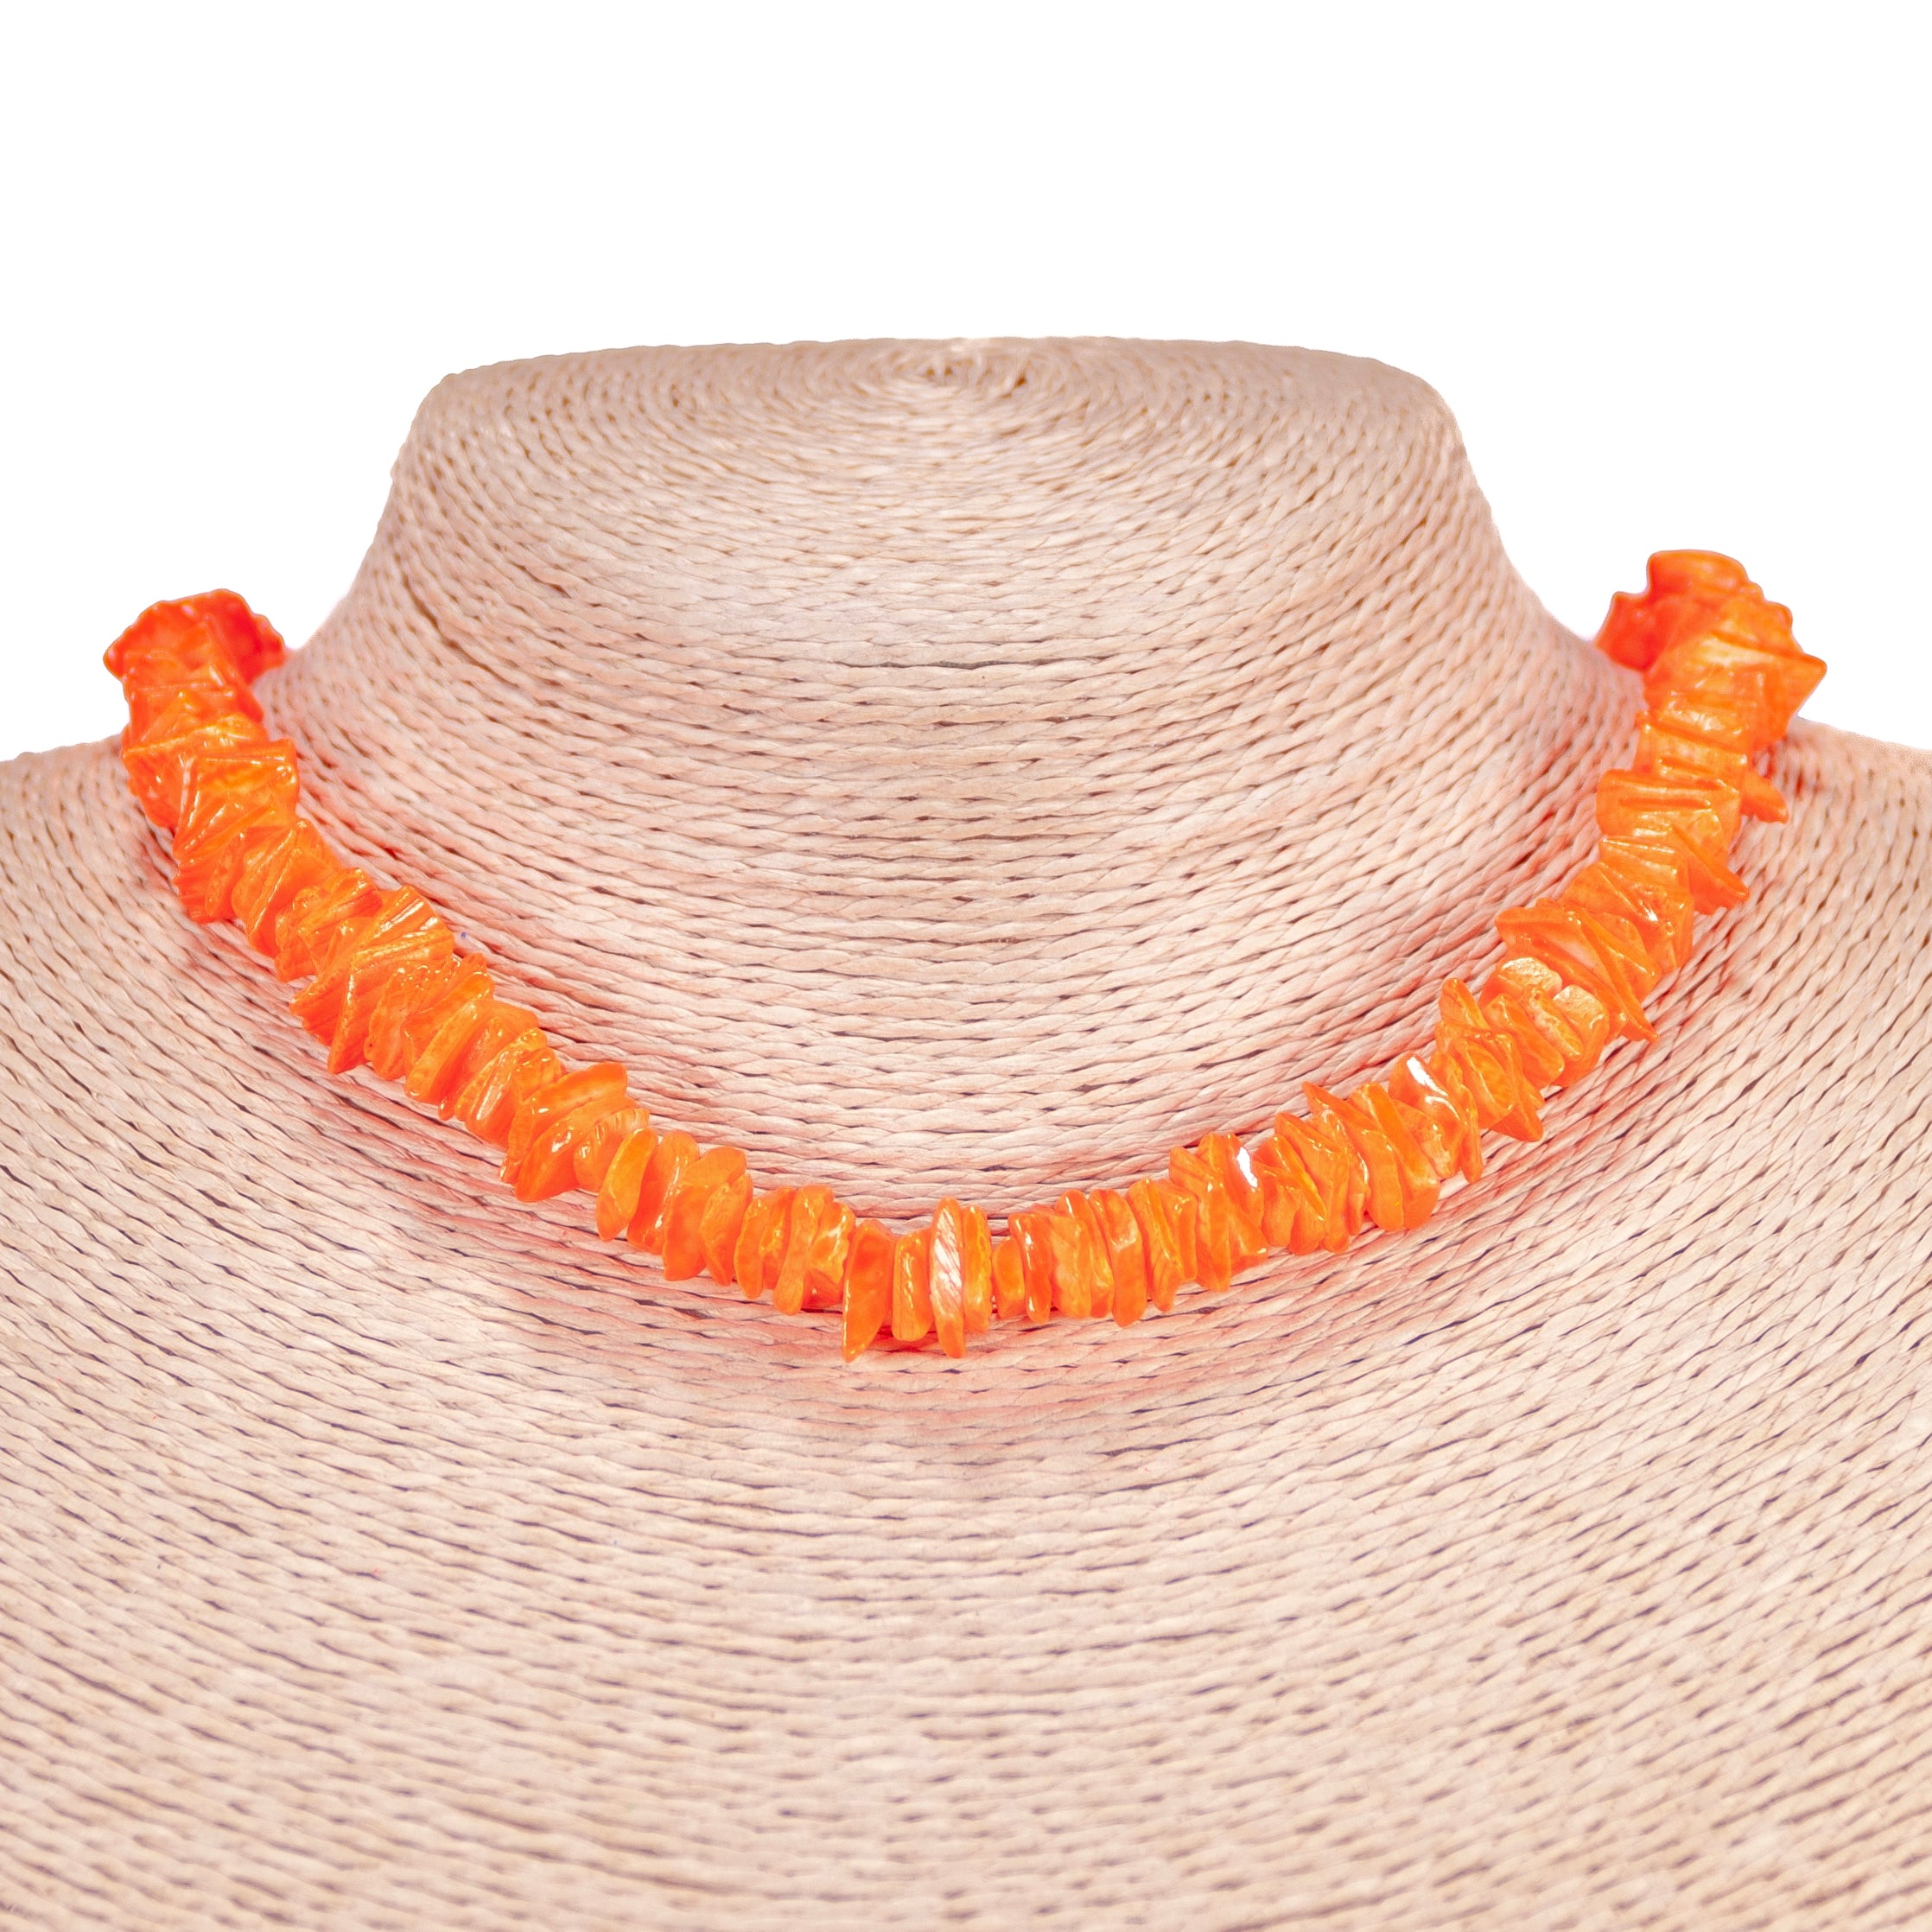 Neon Orange Puka Chip Shell Beads Necklace and Anklet Set